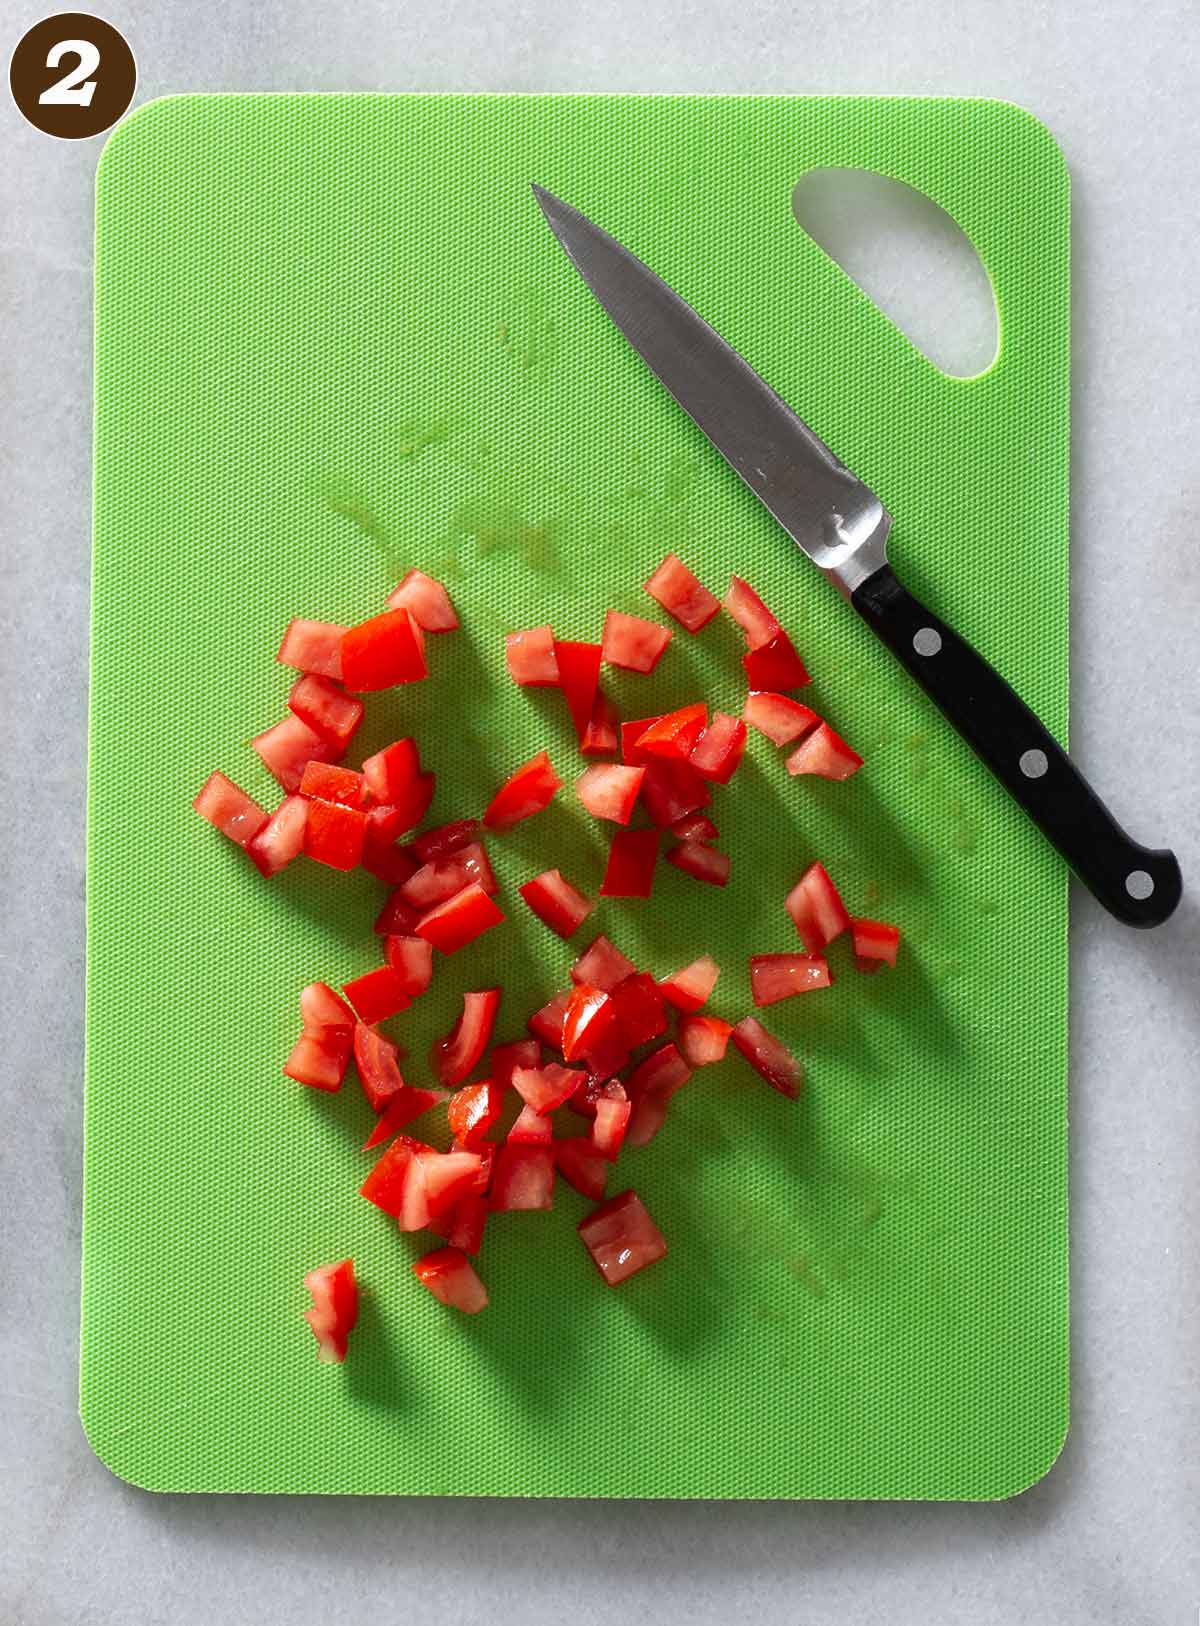 Diced tomato on a cutting mat with a knife.